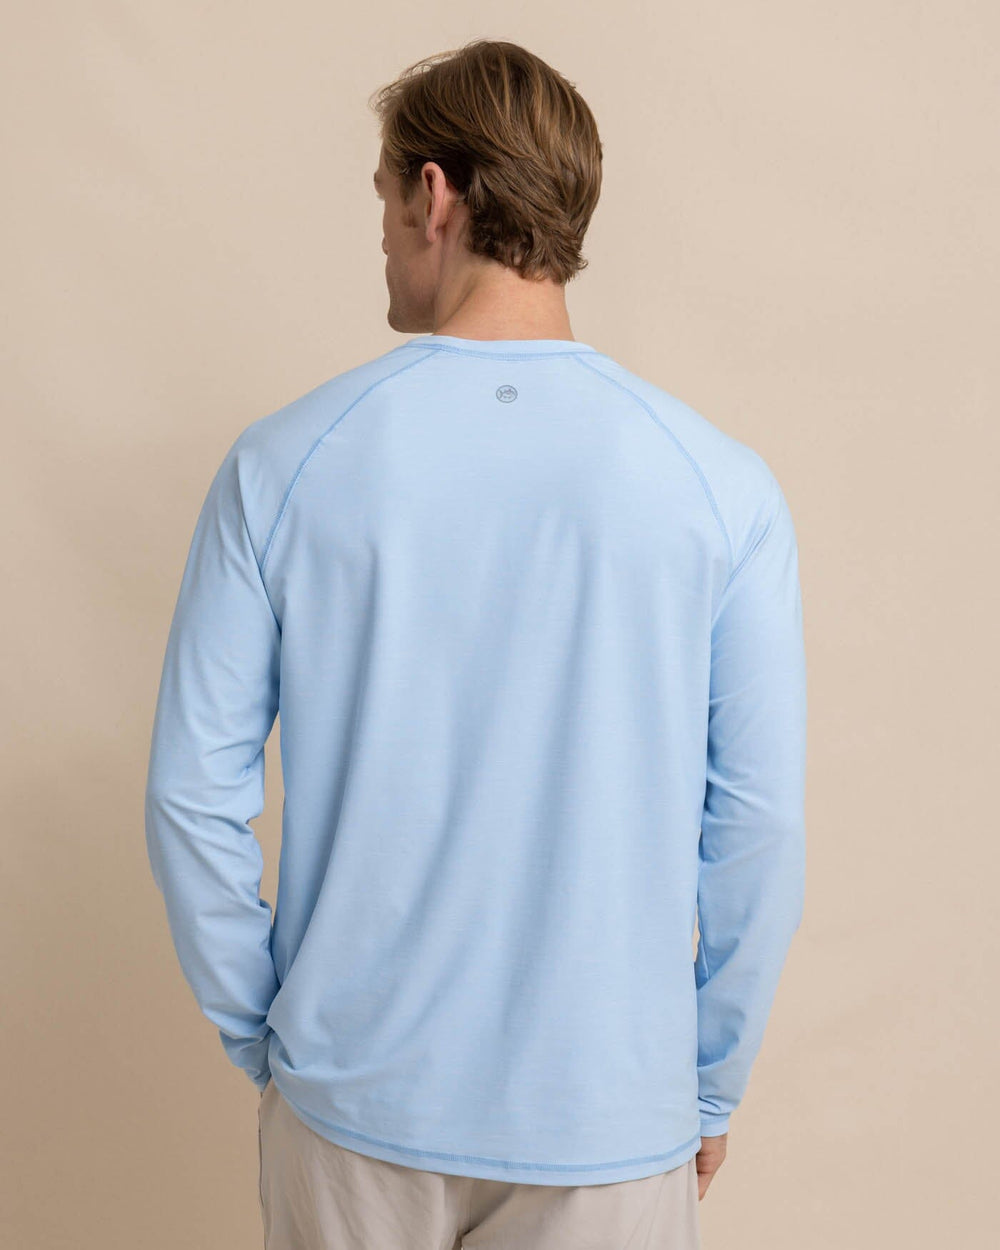 The back view of the Southern Tide brrr illiant Performance Long Sleeve T-Shirt by Southern Tide - Clearwater Blue